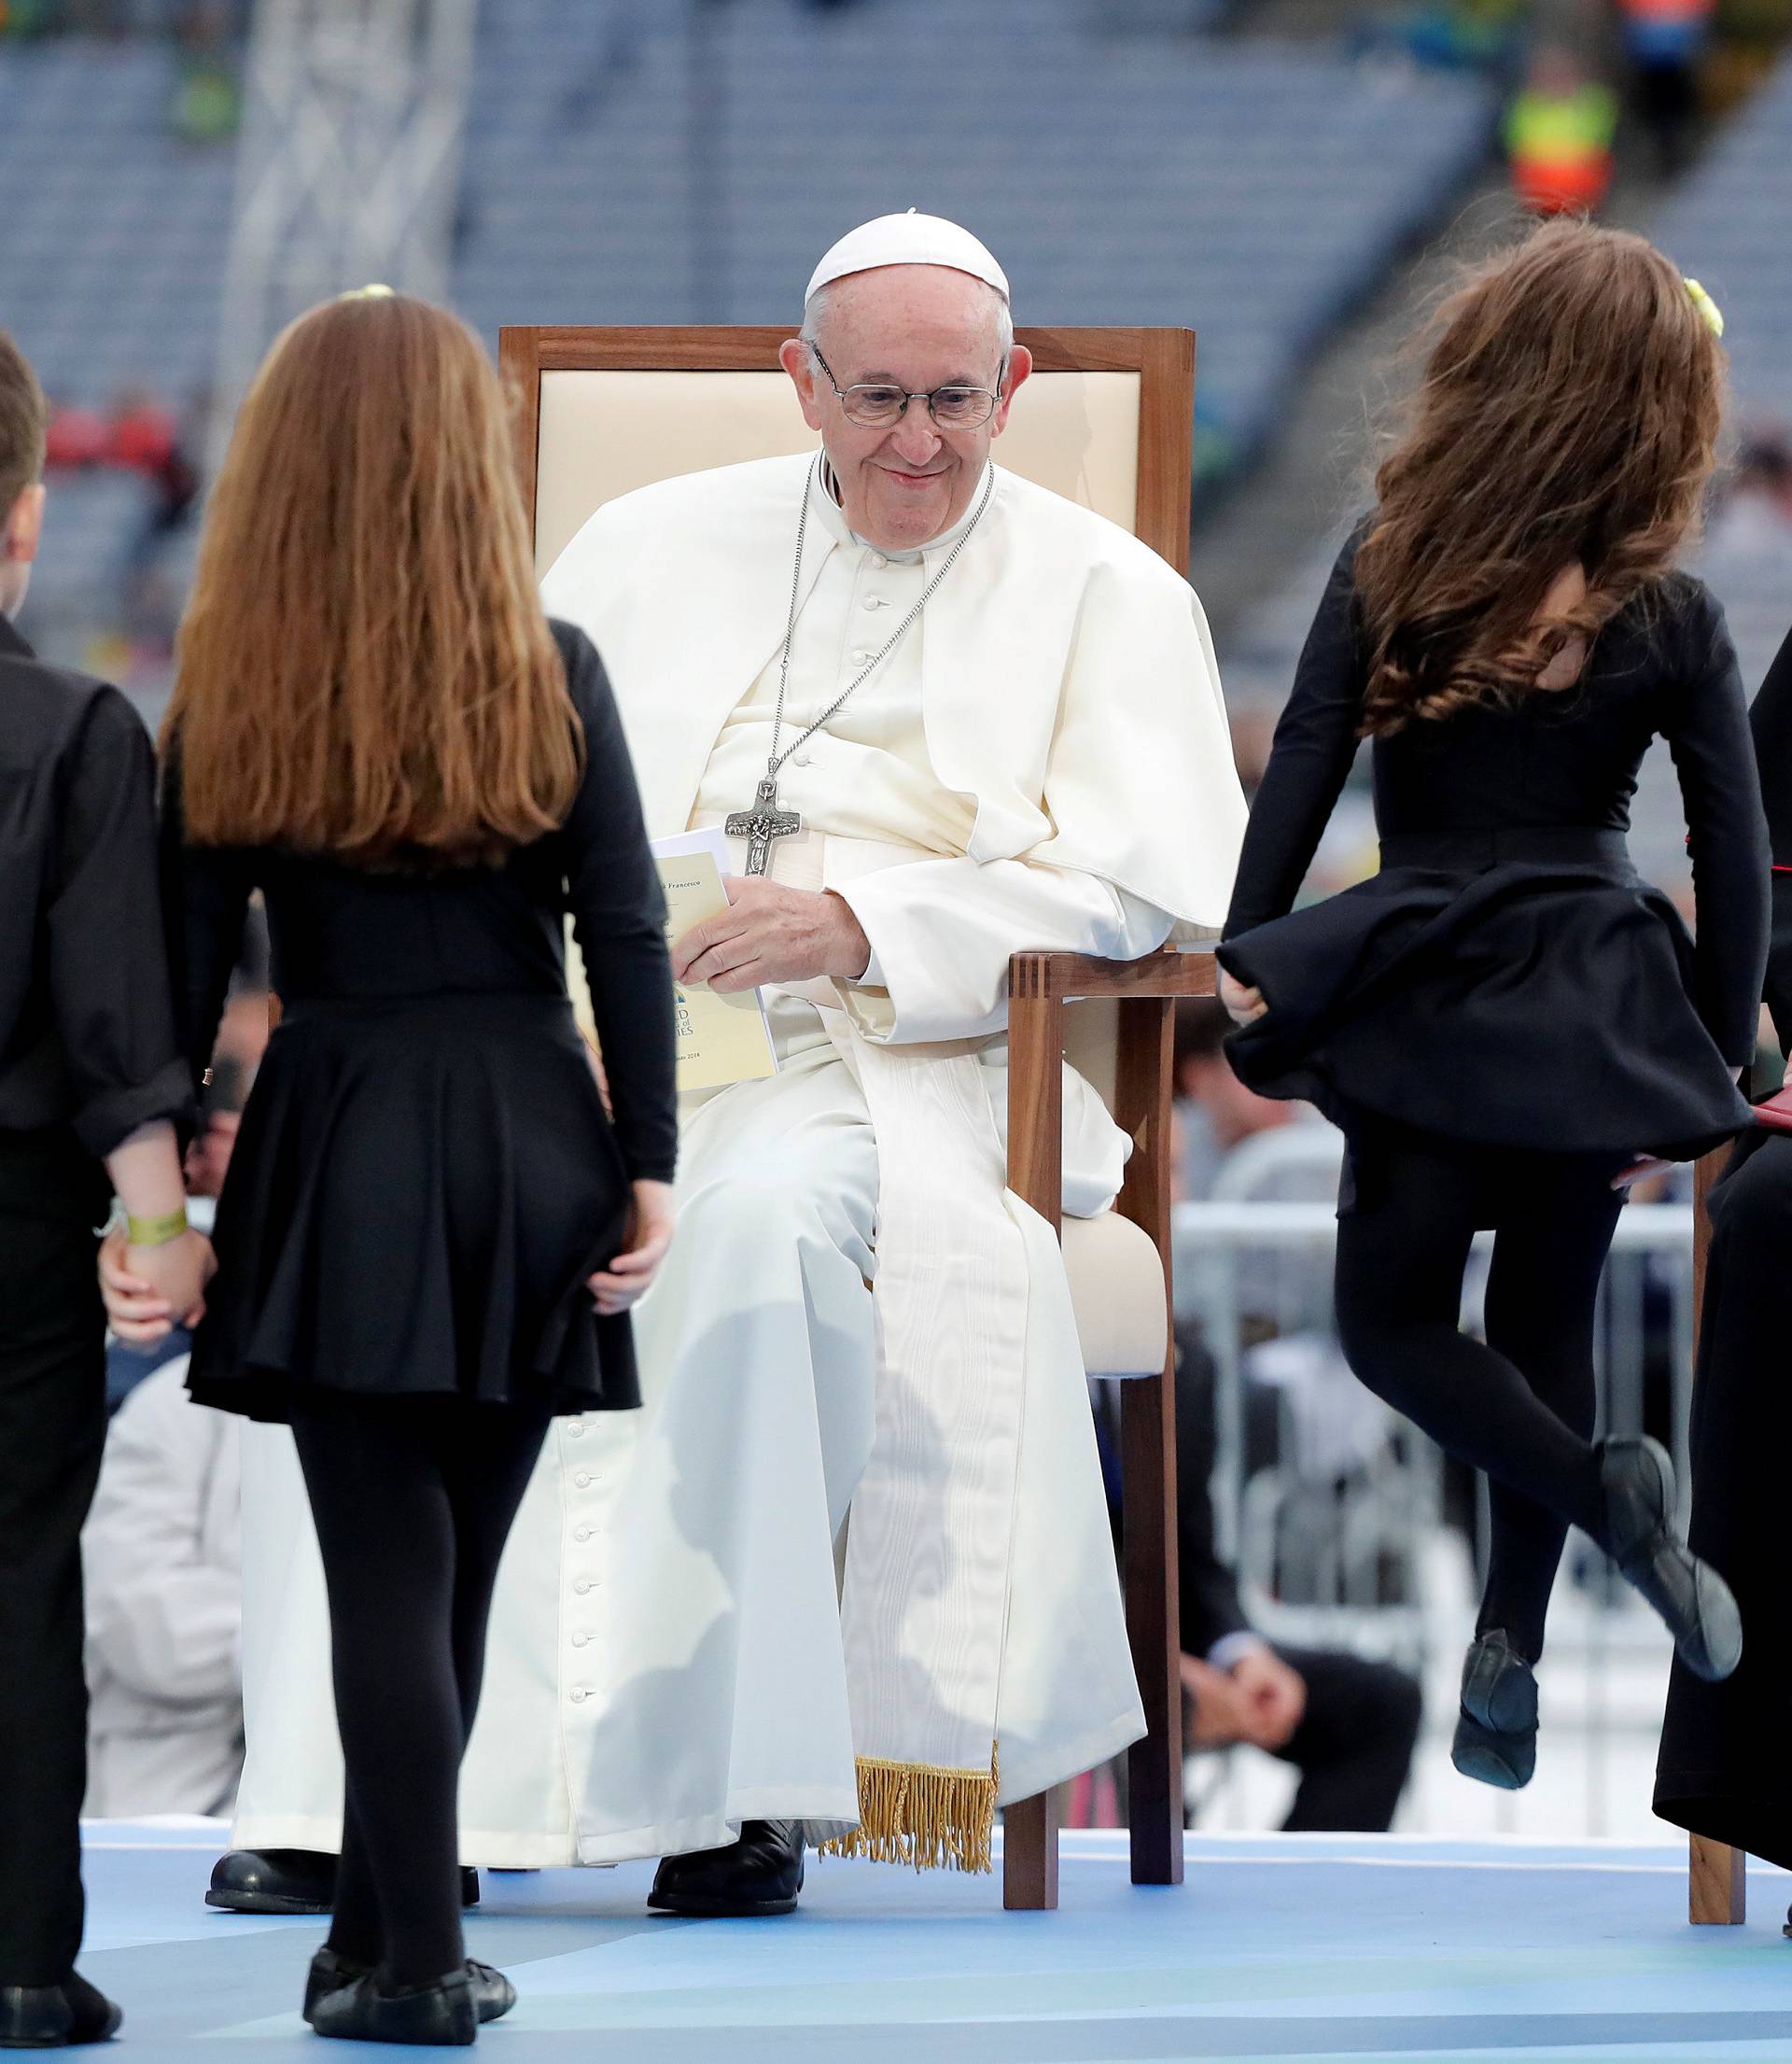 Pope Francis attends the Festival of Families at Croke Park during his visit to Dublin